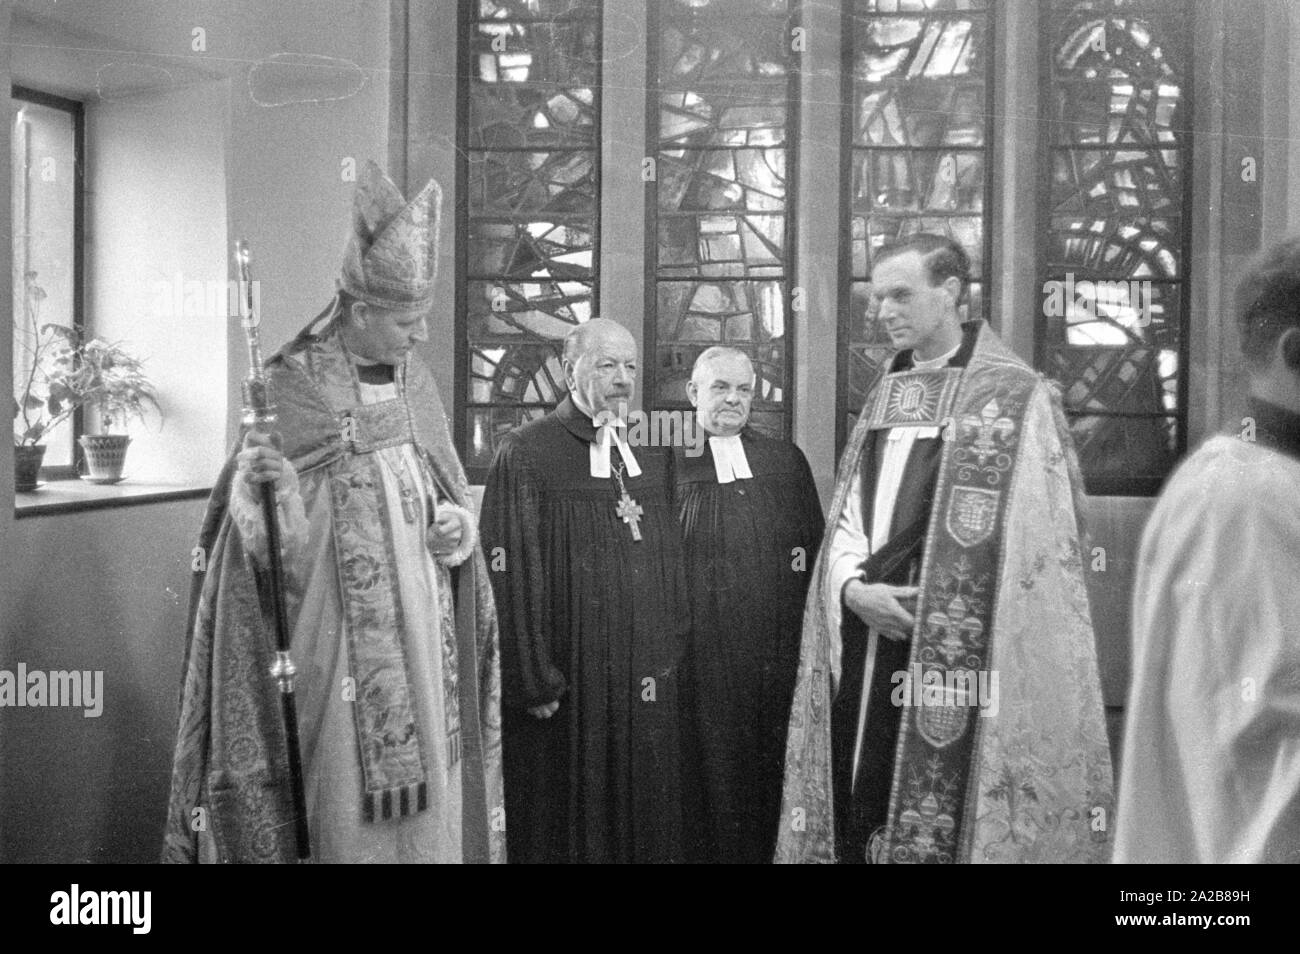 The German bishop, Otto Dibelius (2nd from left), participates at the groundbreaking ceremony  of the 'International Center for Reconciliation' in the ruin of the destroyed St Michael's Cathedral. Stock Photo